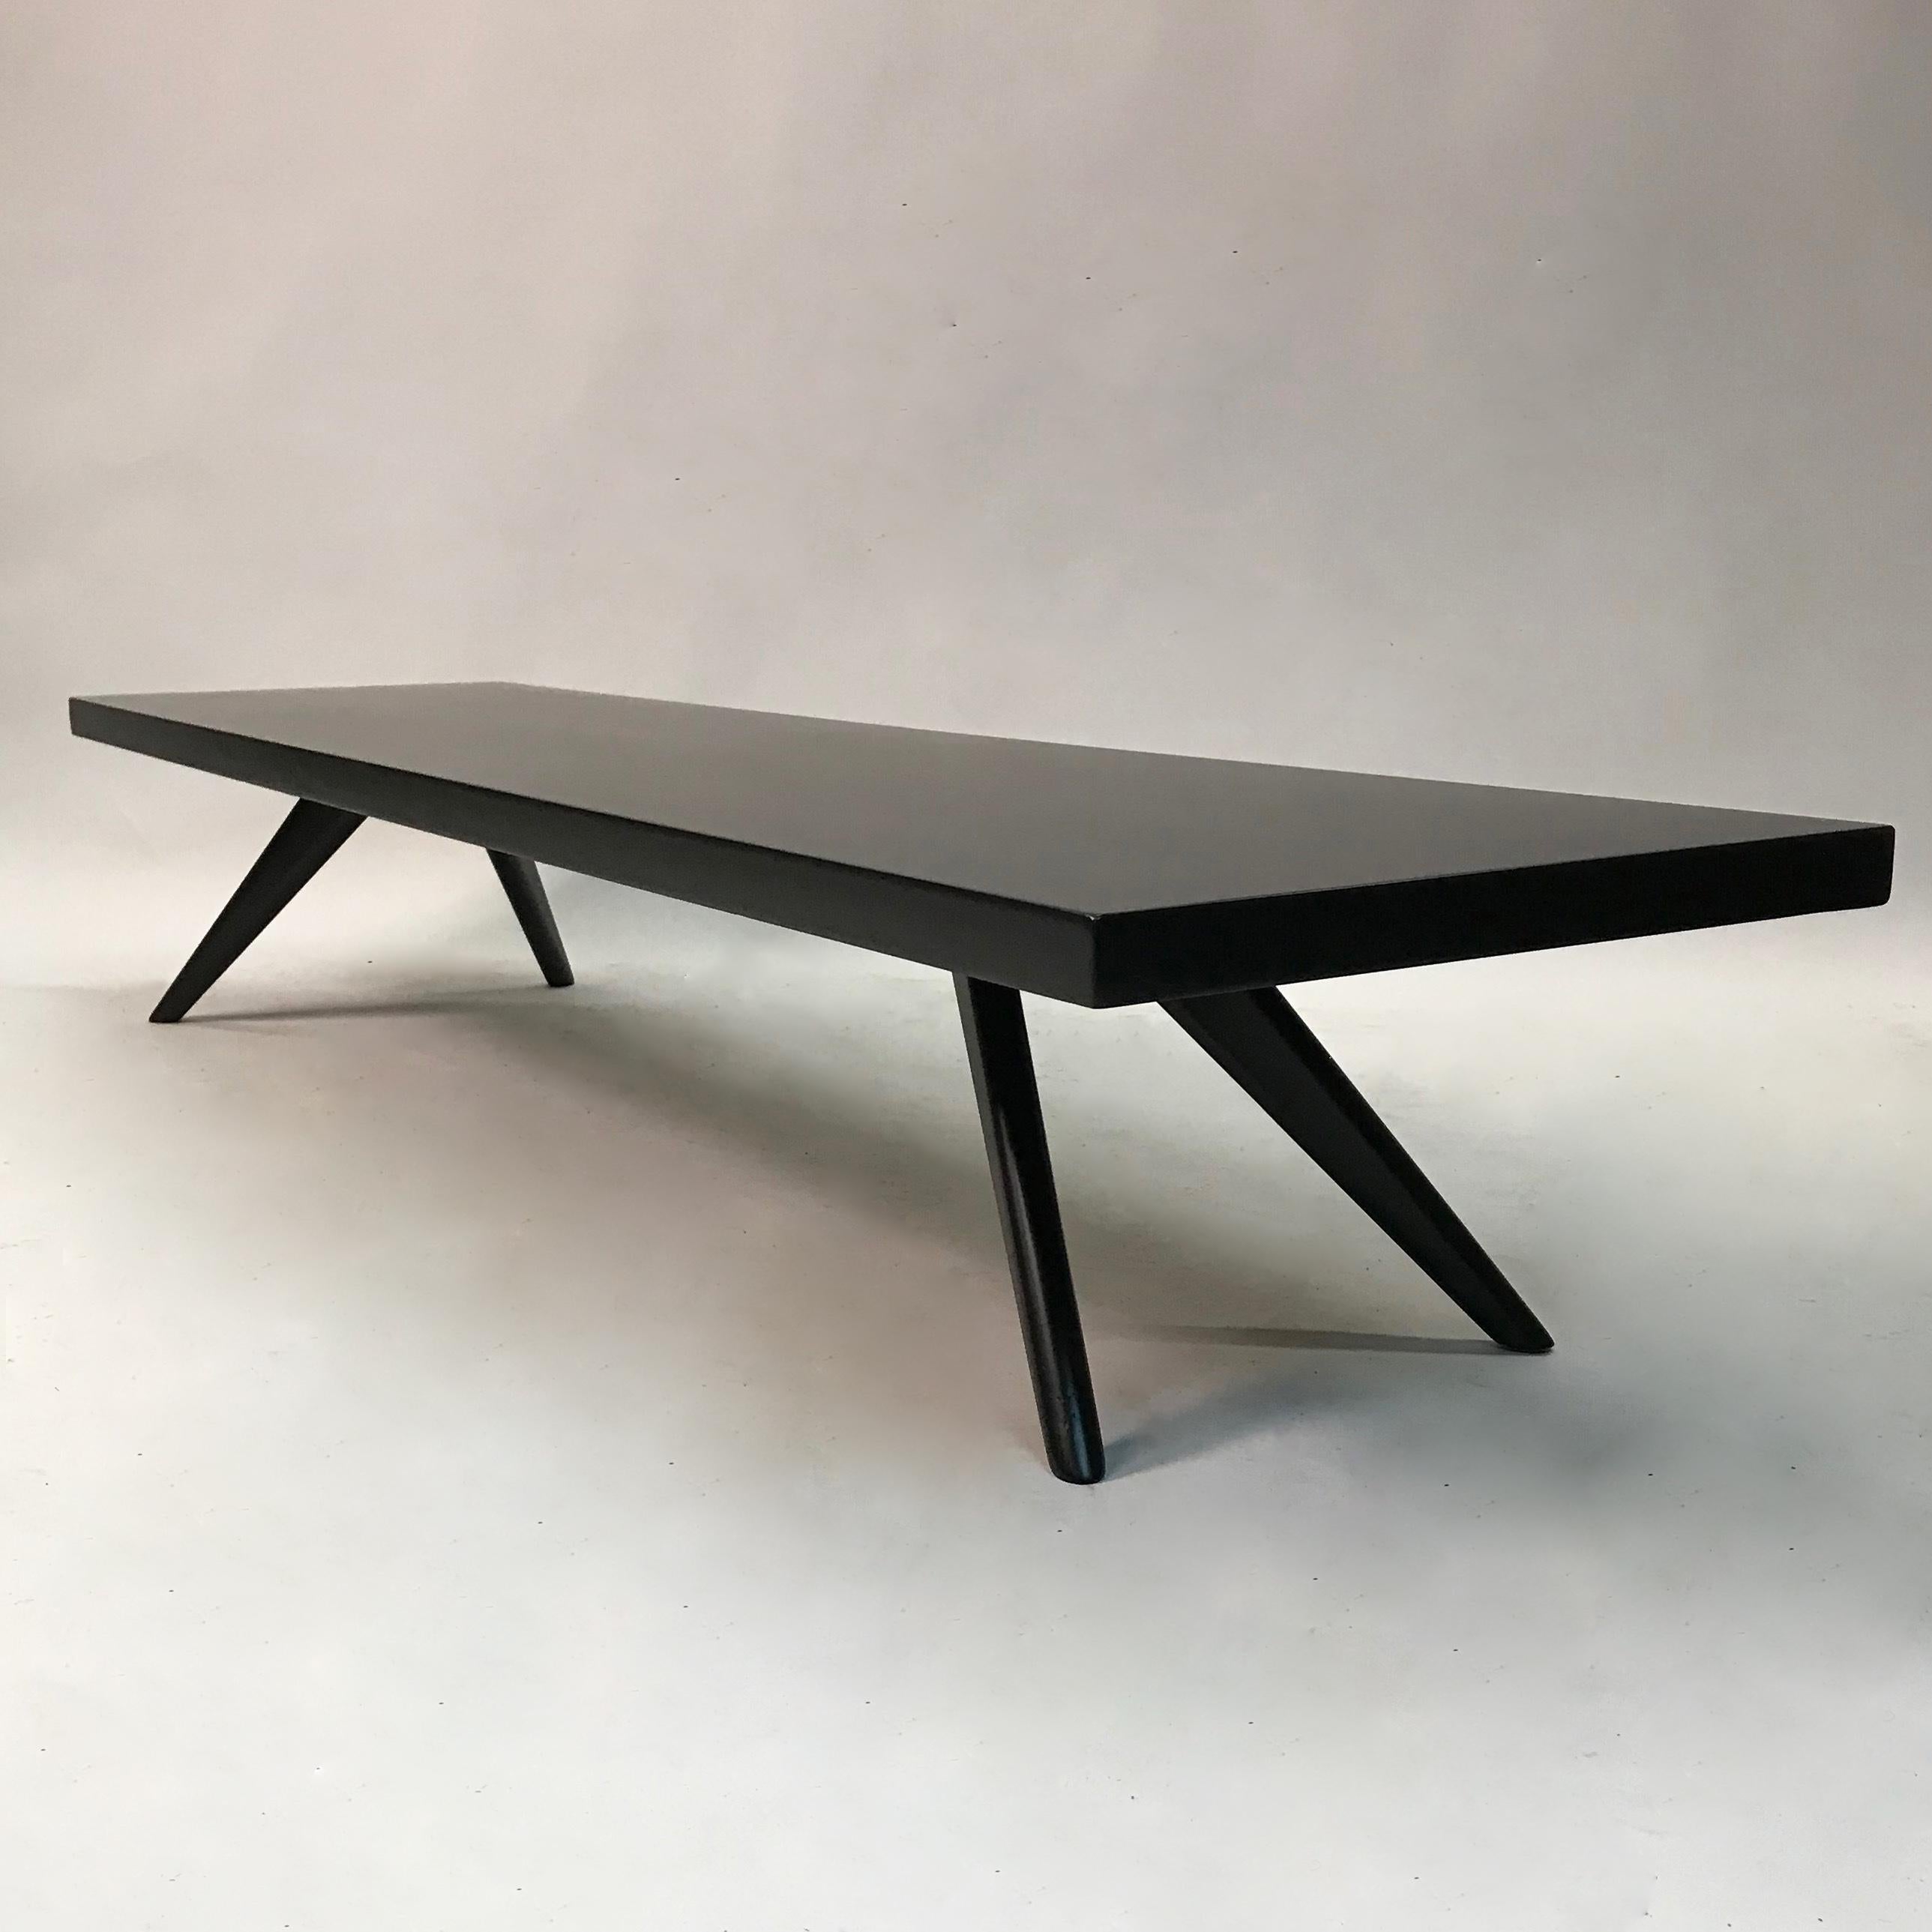 Mid-Century Modern, black lacquered mahogany, coffee table features a sleek profile with a long, low rectangular top and splayed, tapered legs.